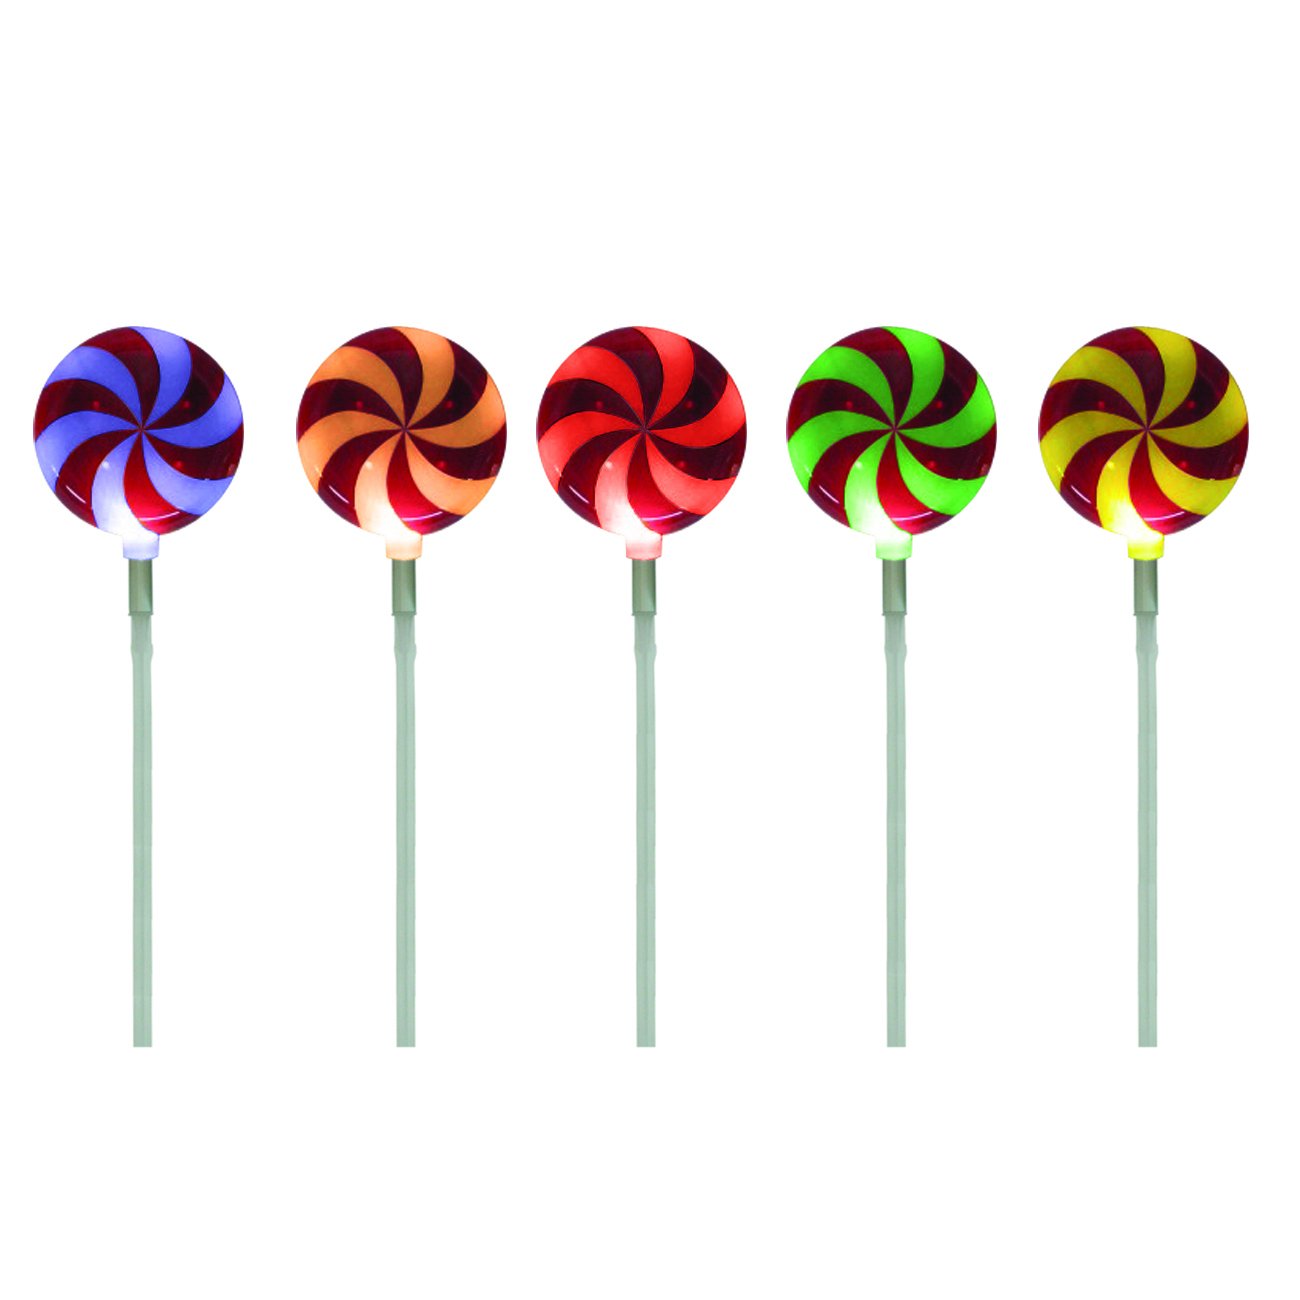 Pathmarker LED Light Show, Set of 5 Peppermint Candies